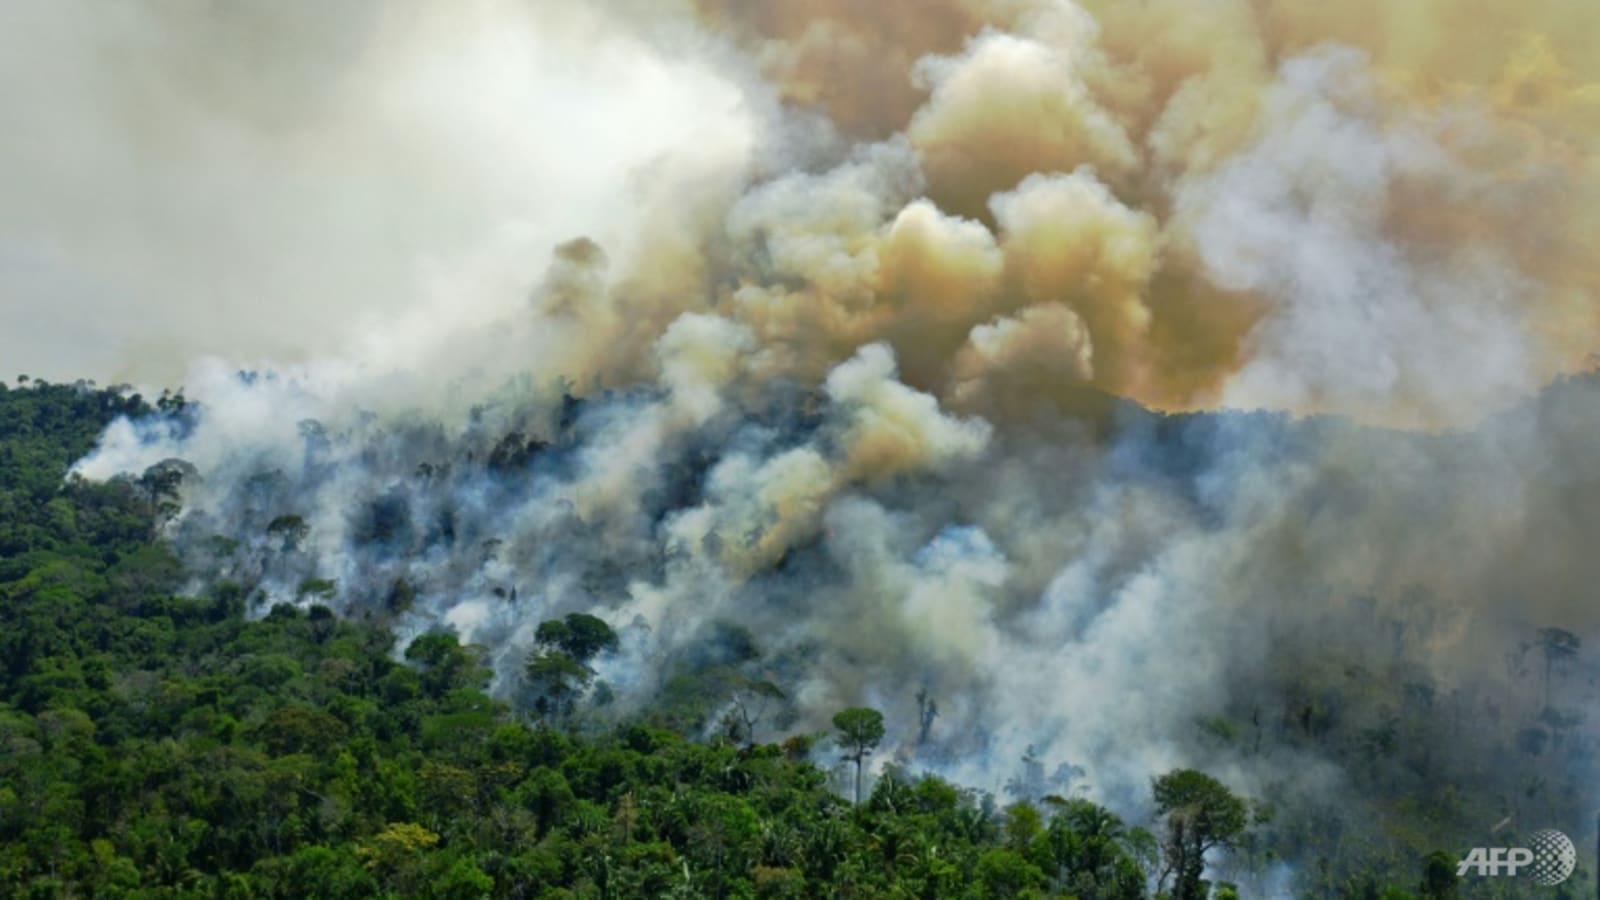 European stores pull products linked to Brazil deforestation